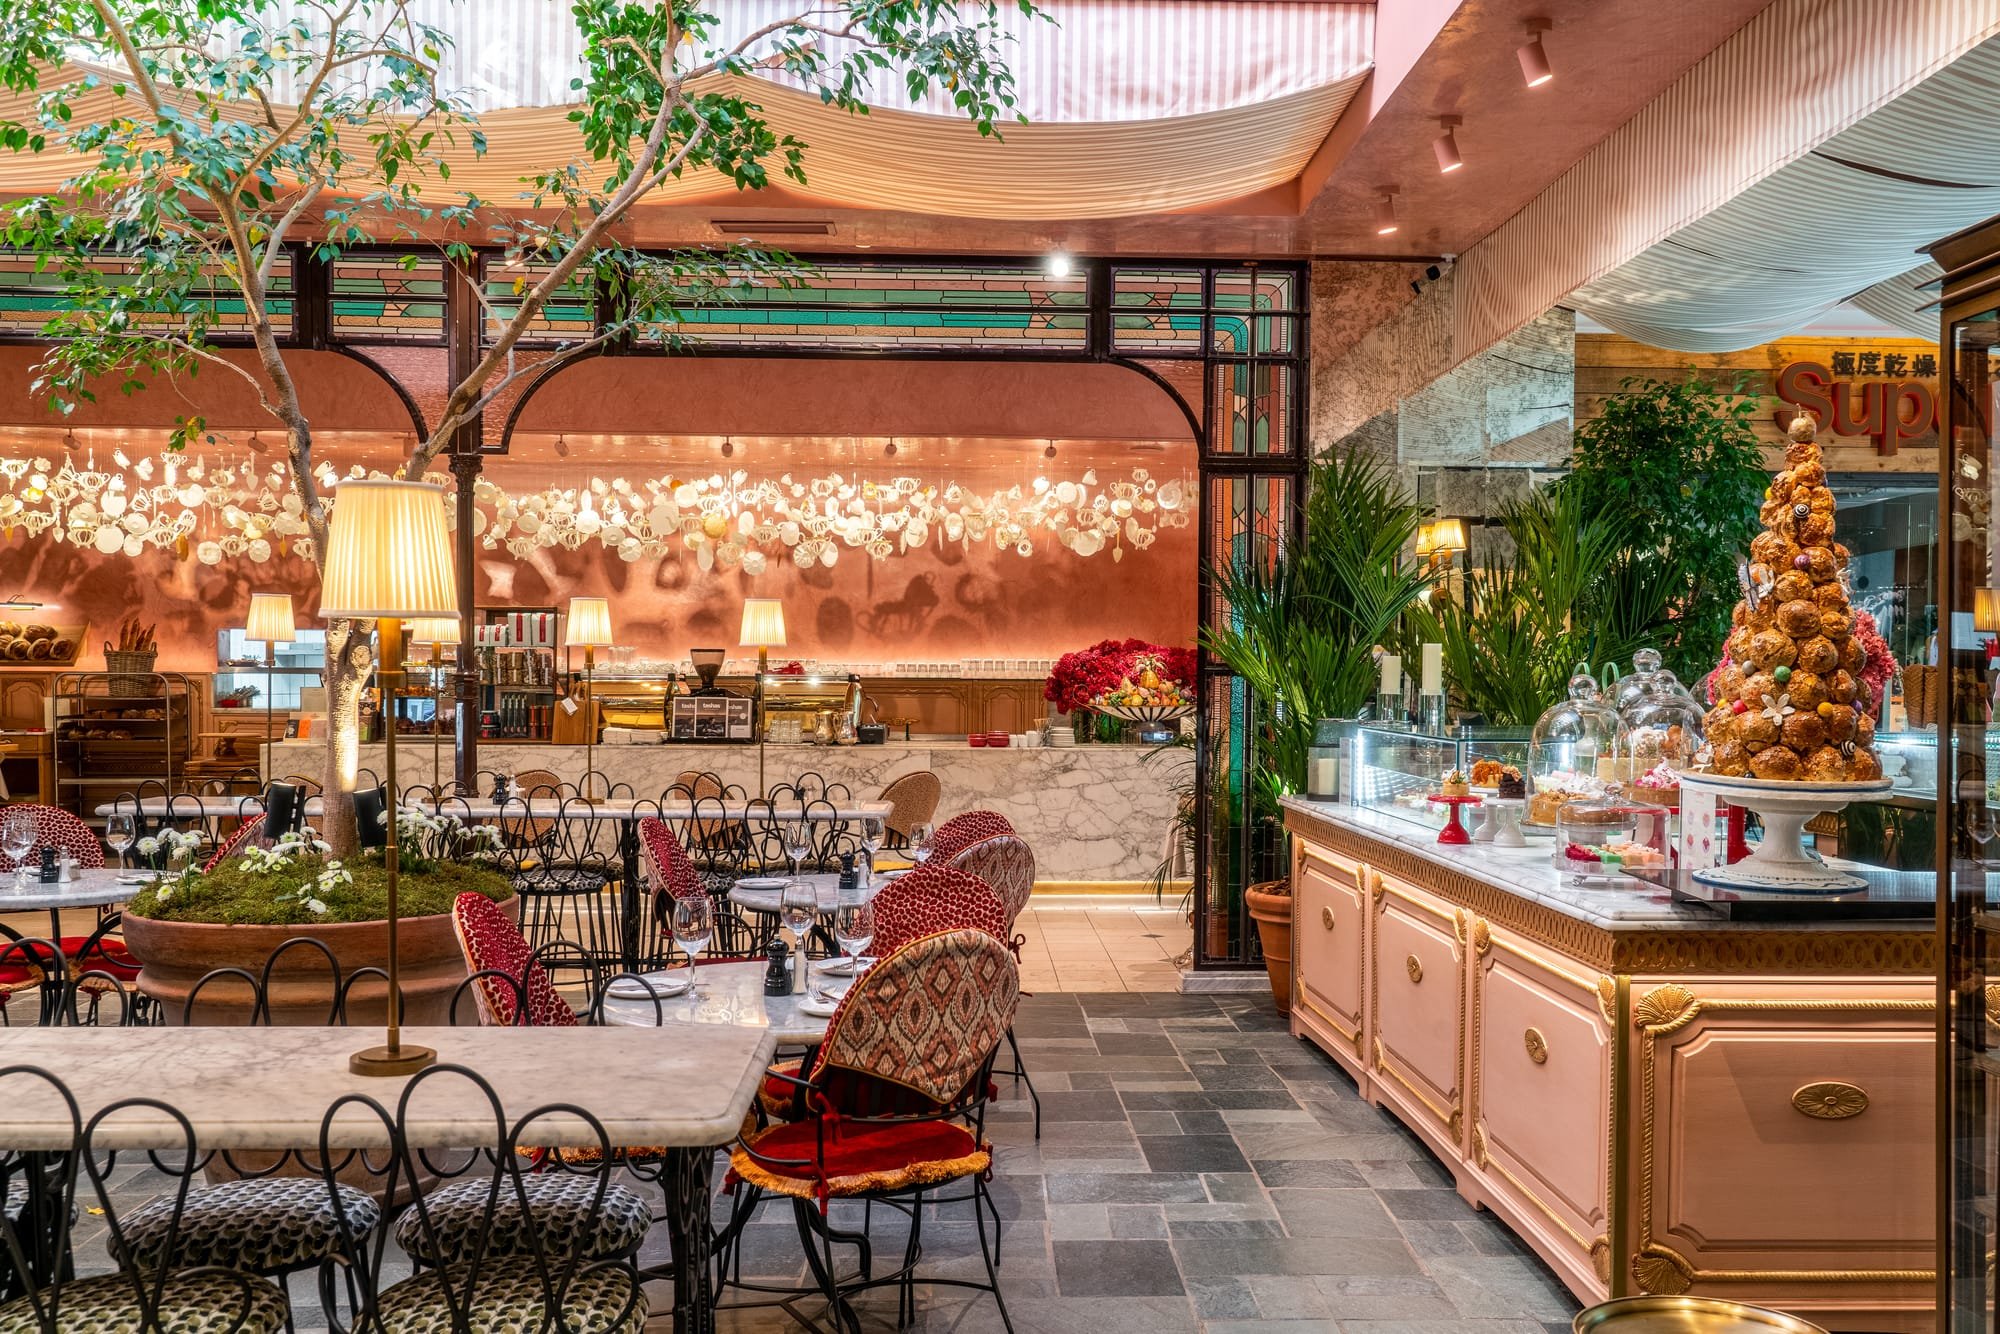 Never mind breakfast at Tiffany’s, Hyde Park Corner is filled with breakfast gems